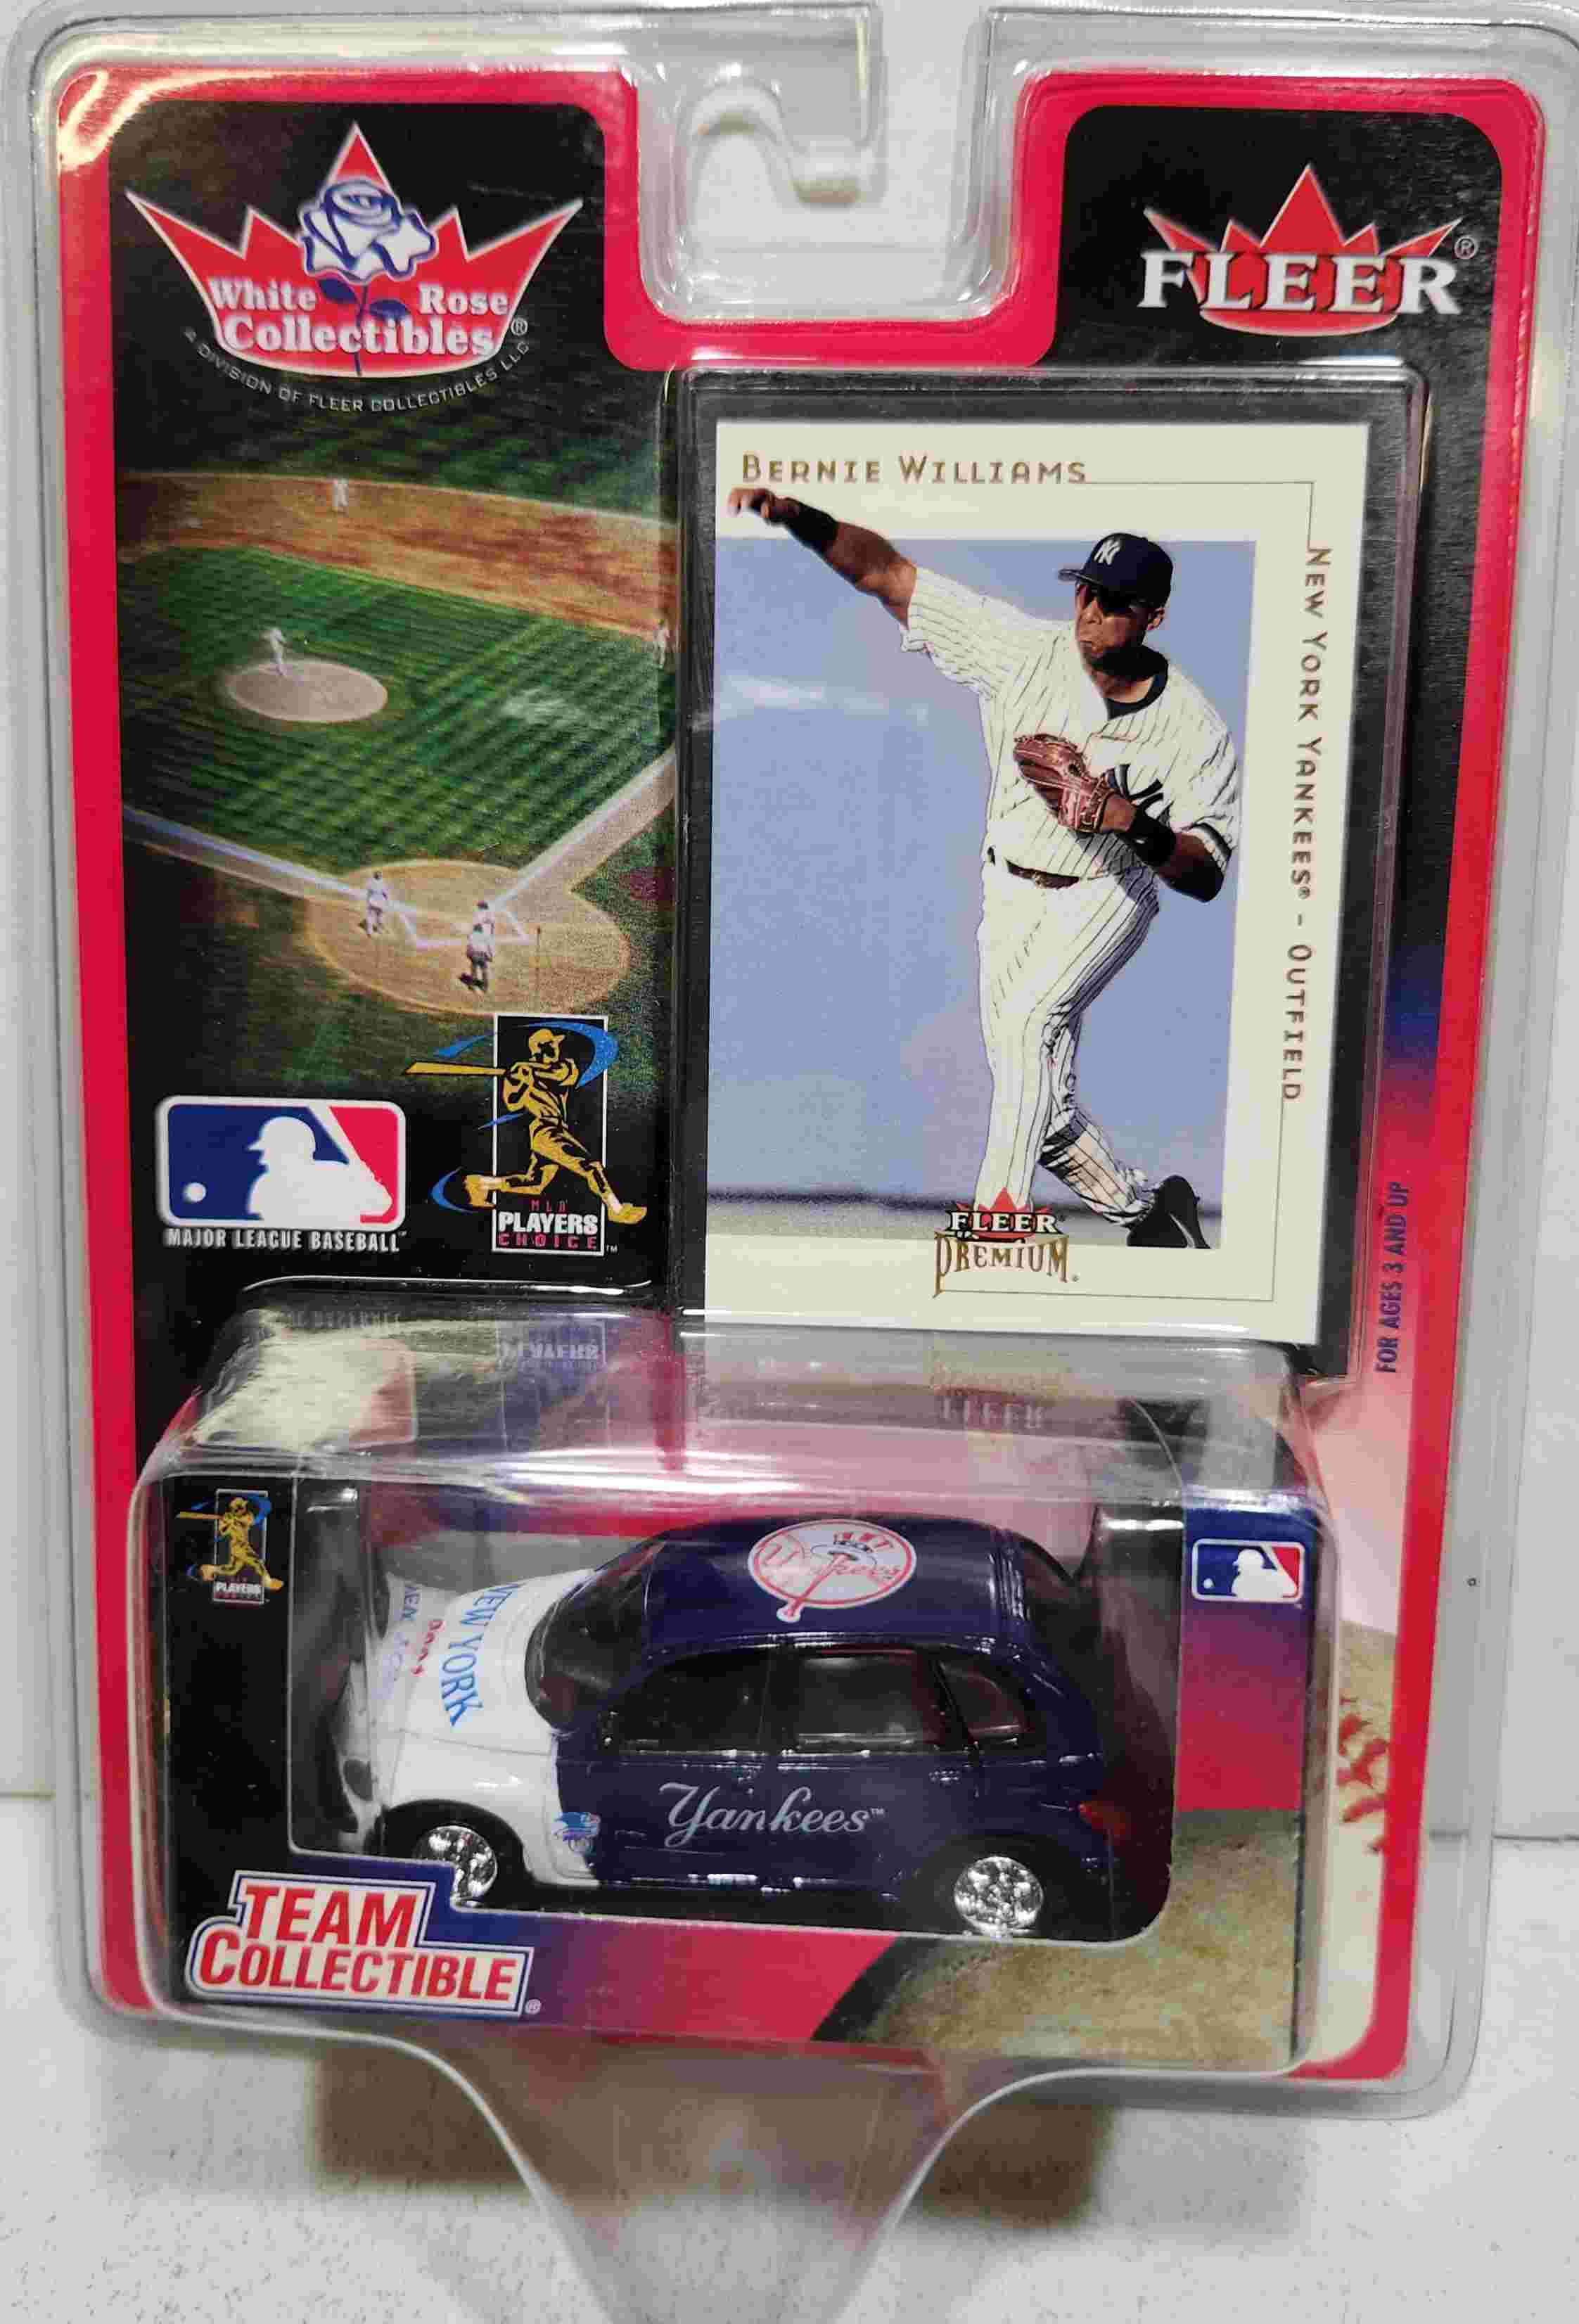 2001 NY Yankees 1/64th PT Cruiser with Bernie Williams trading card